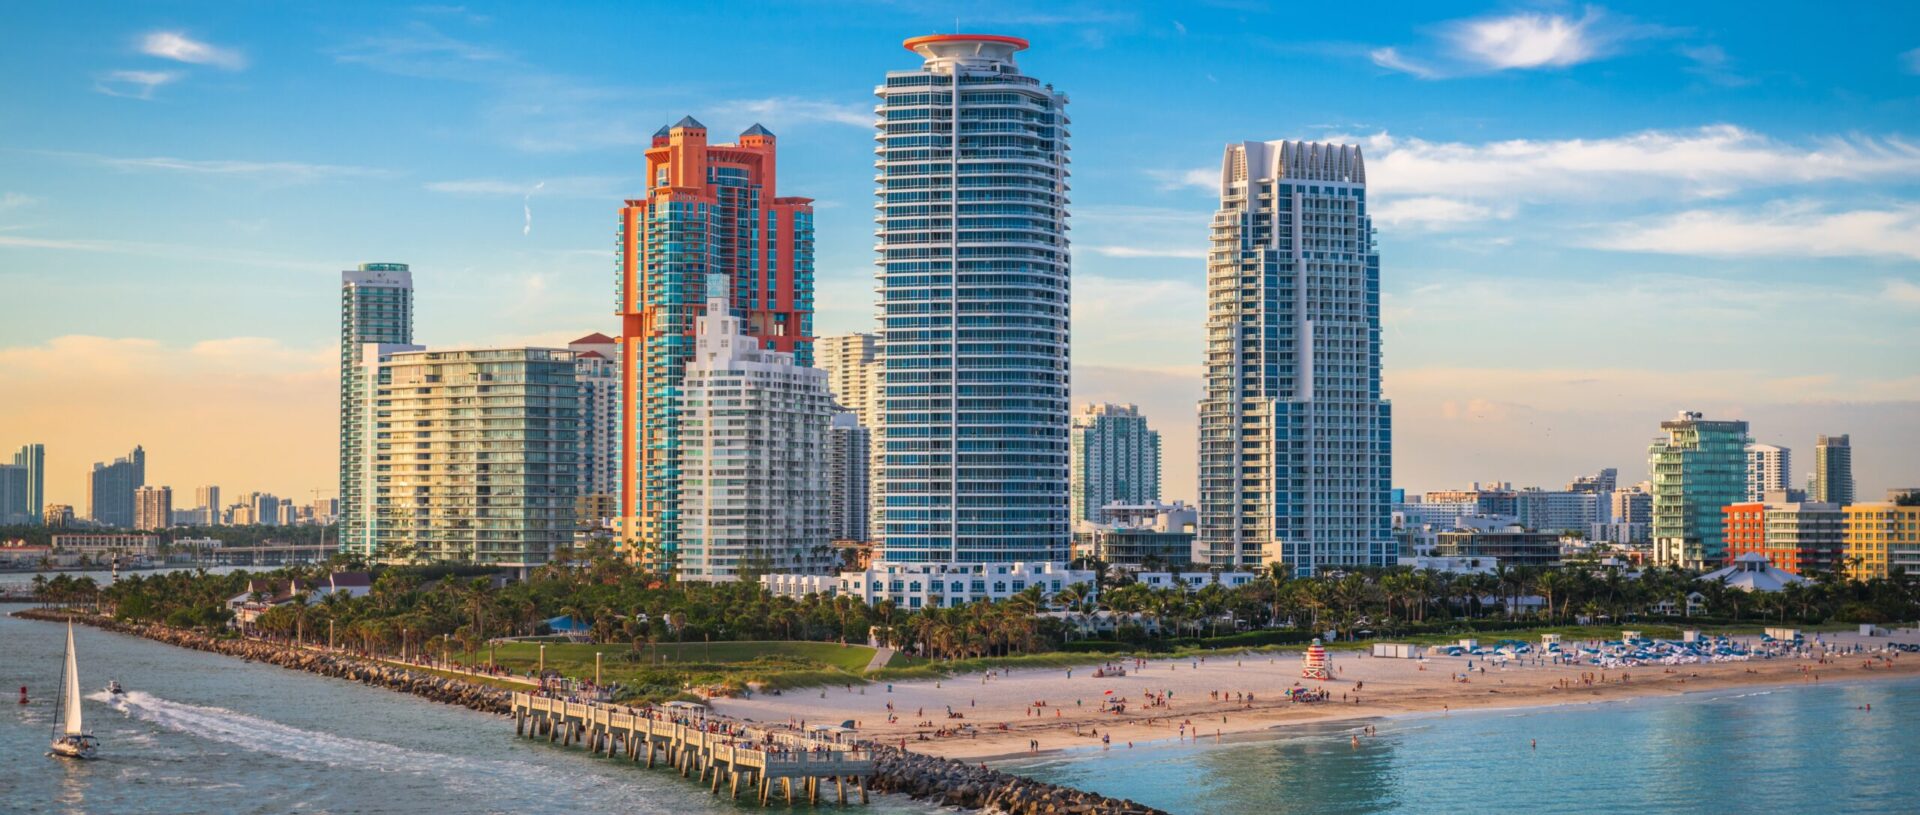 Eight Of The Ten Most Expensive Metros For Rent Are In California And Florida